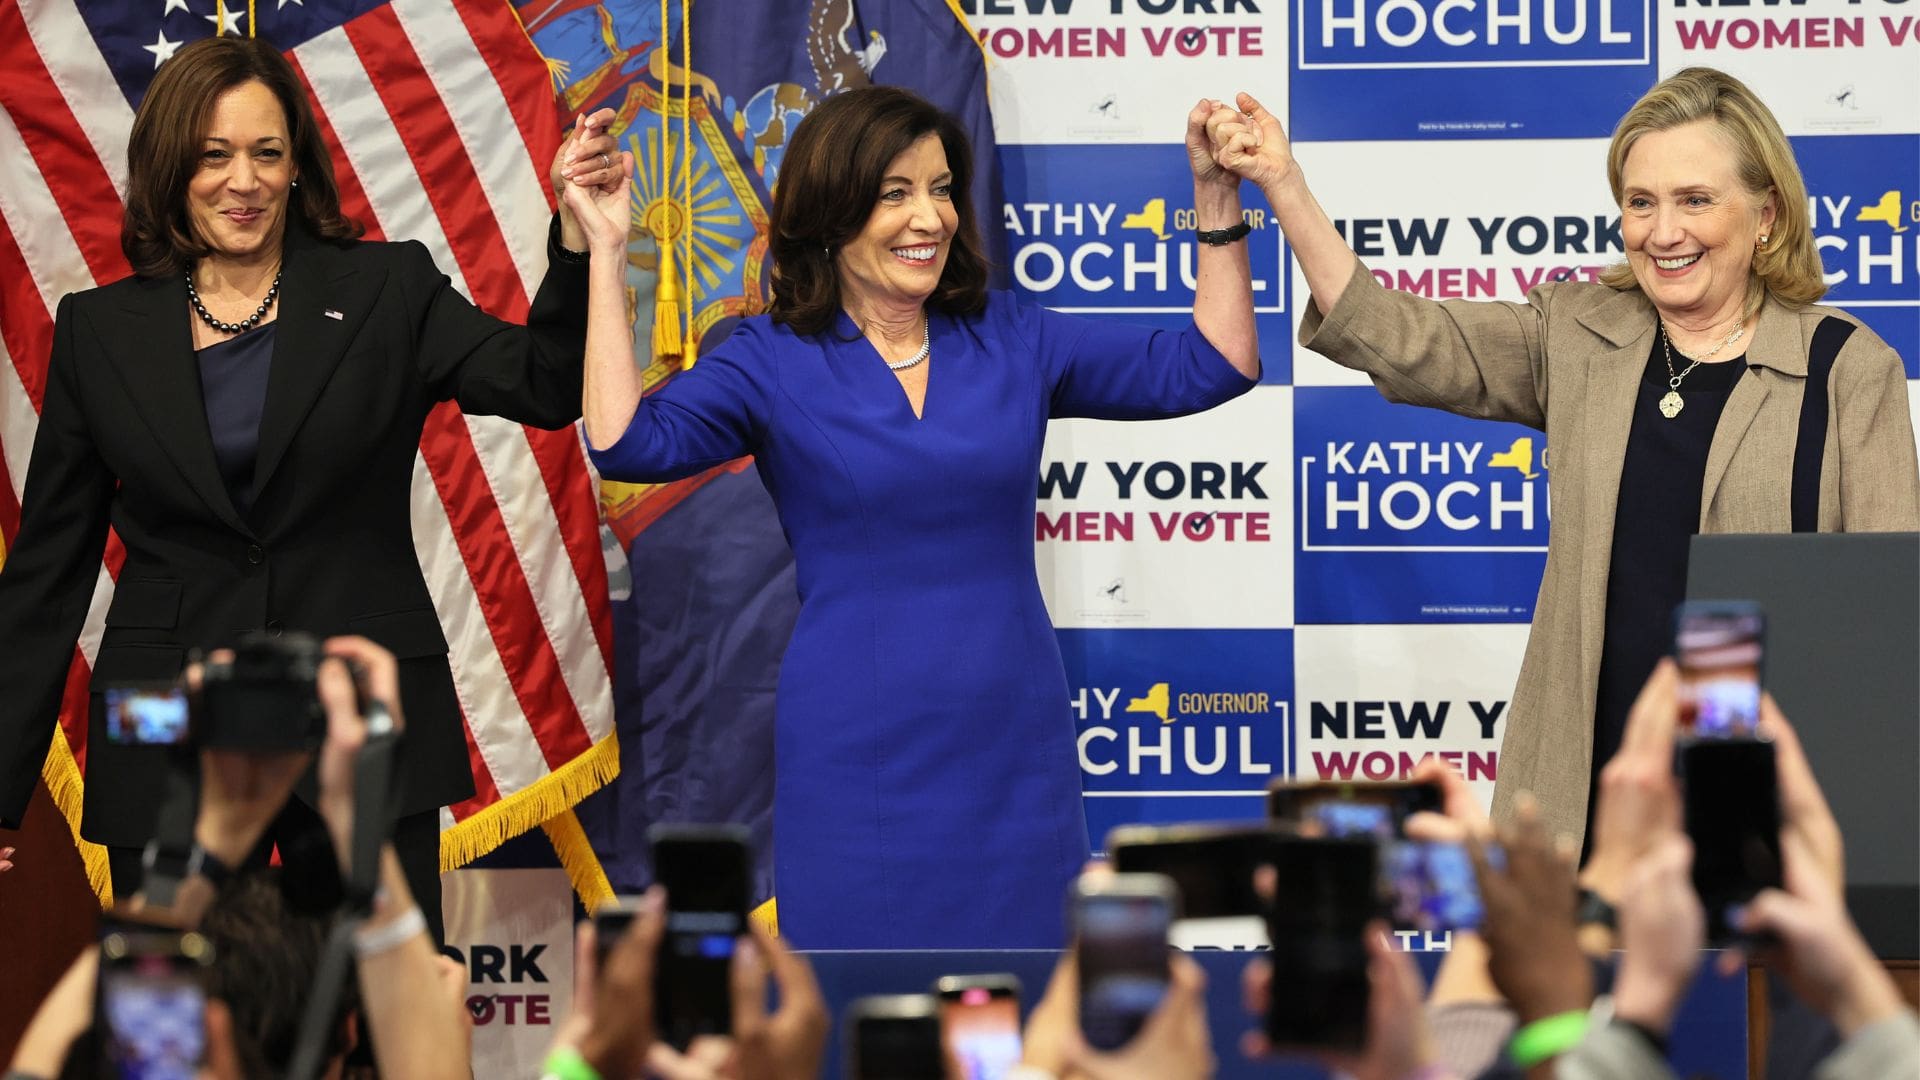 while-cnn-displays-data-showing-nyc-crime-up-31%,-kathy-hochul-says-gop-dishonest-about-rising-lawlessness